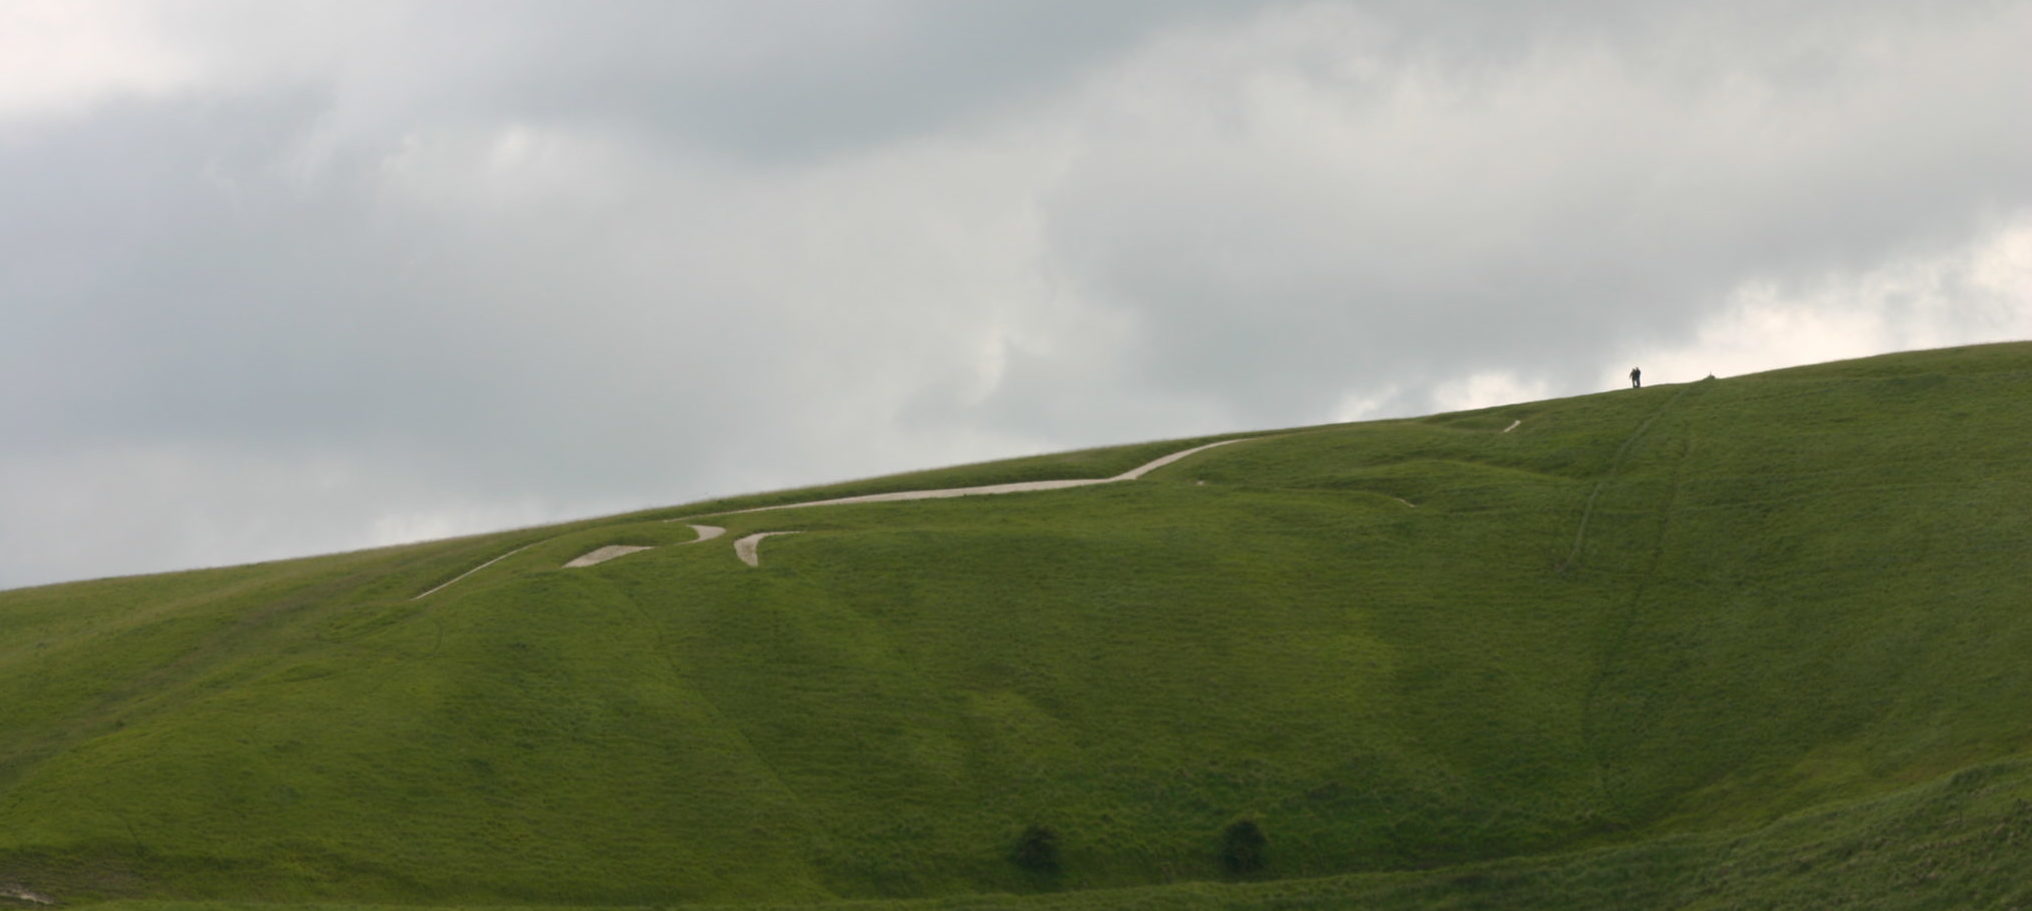 view from the Ridgeway of the Uffington White Horse